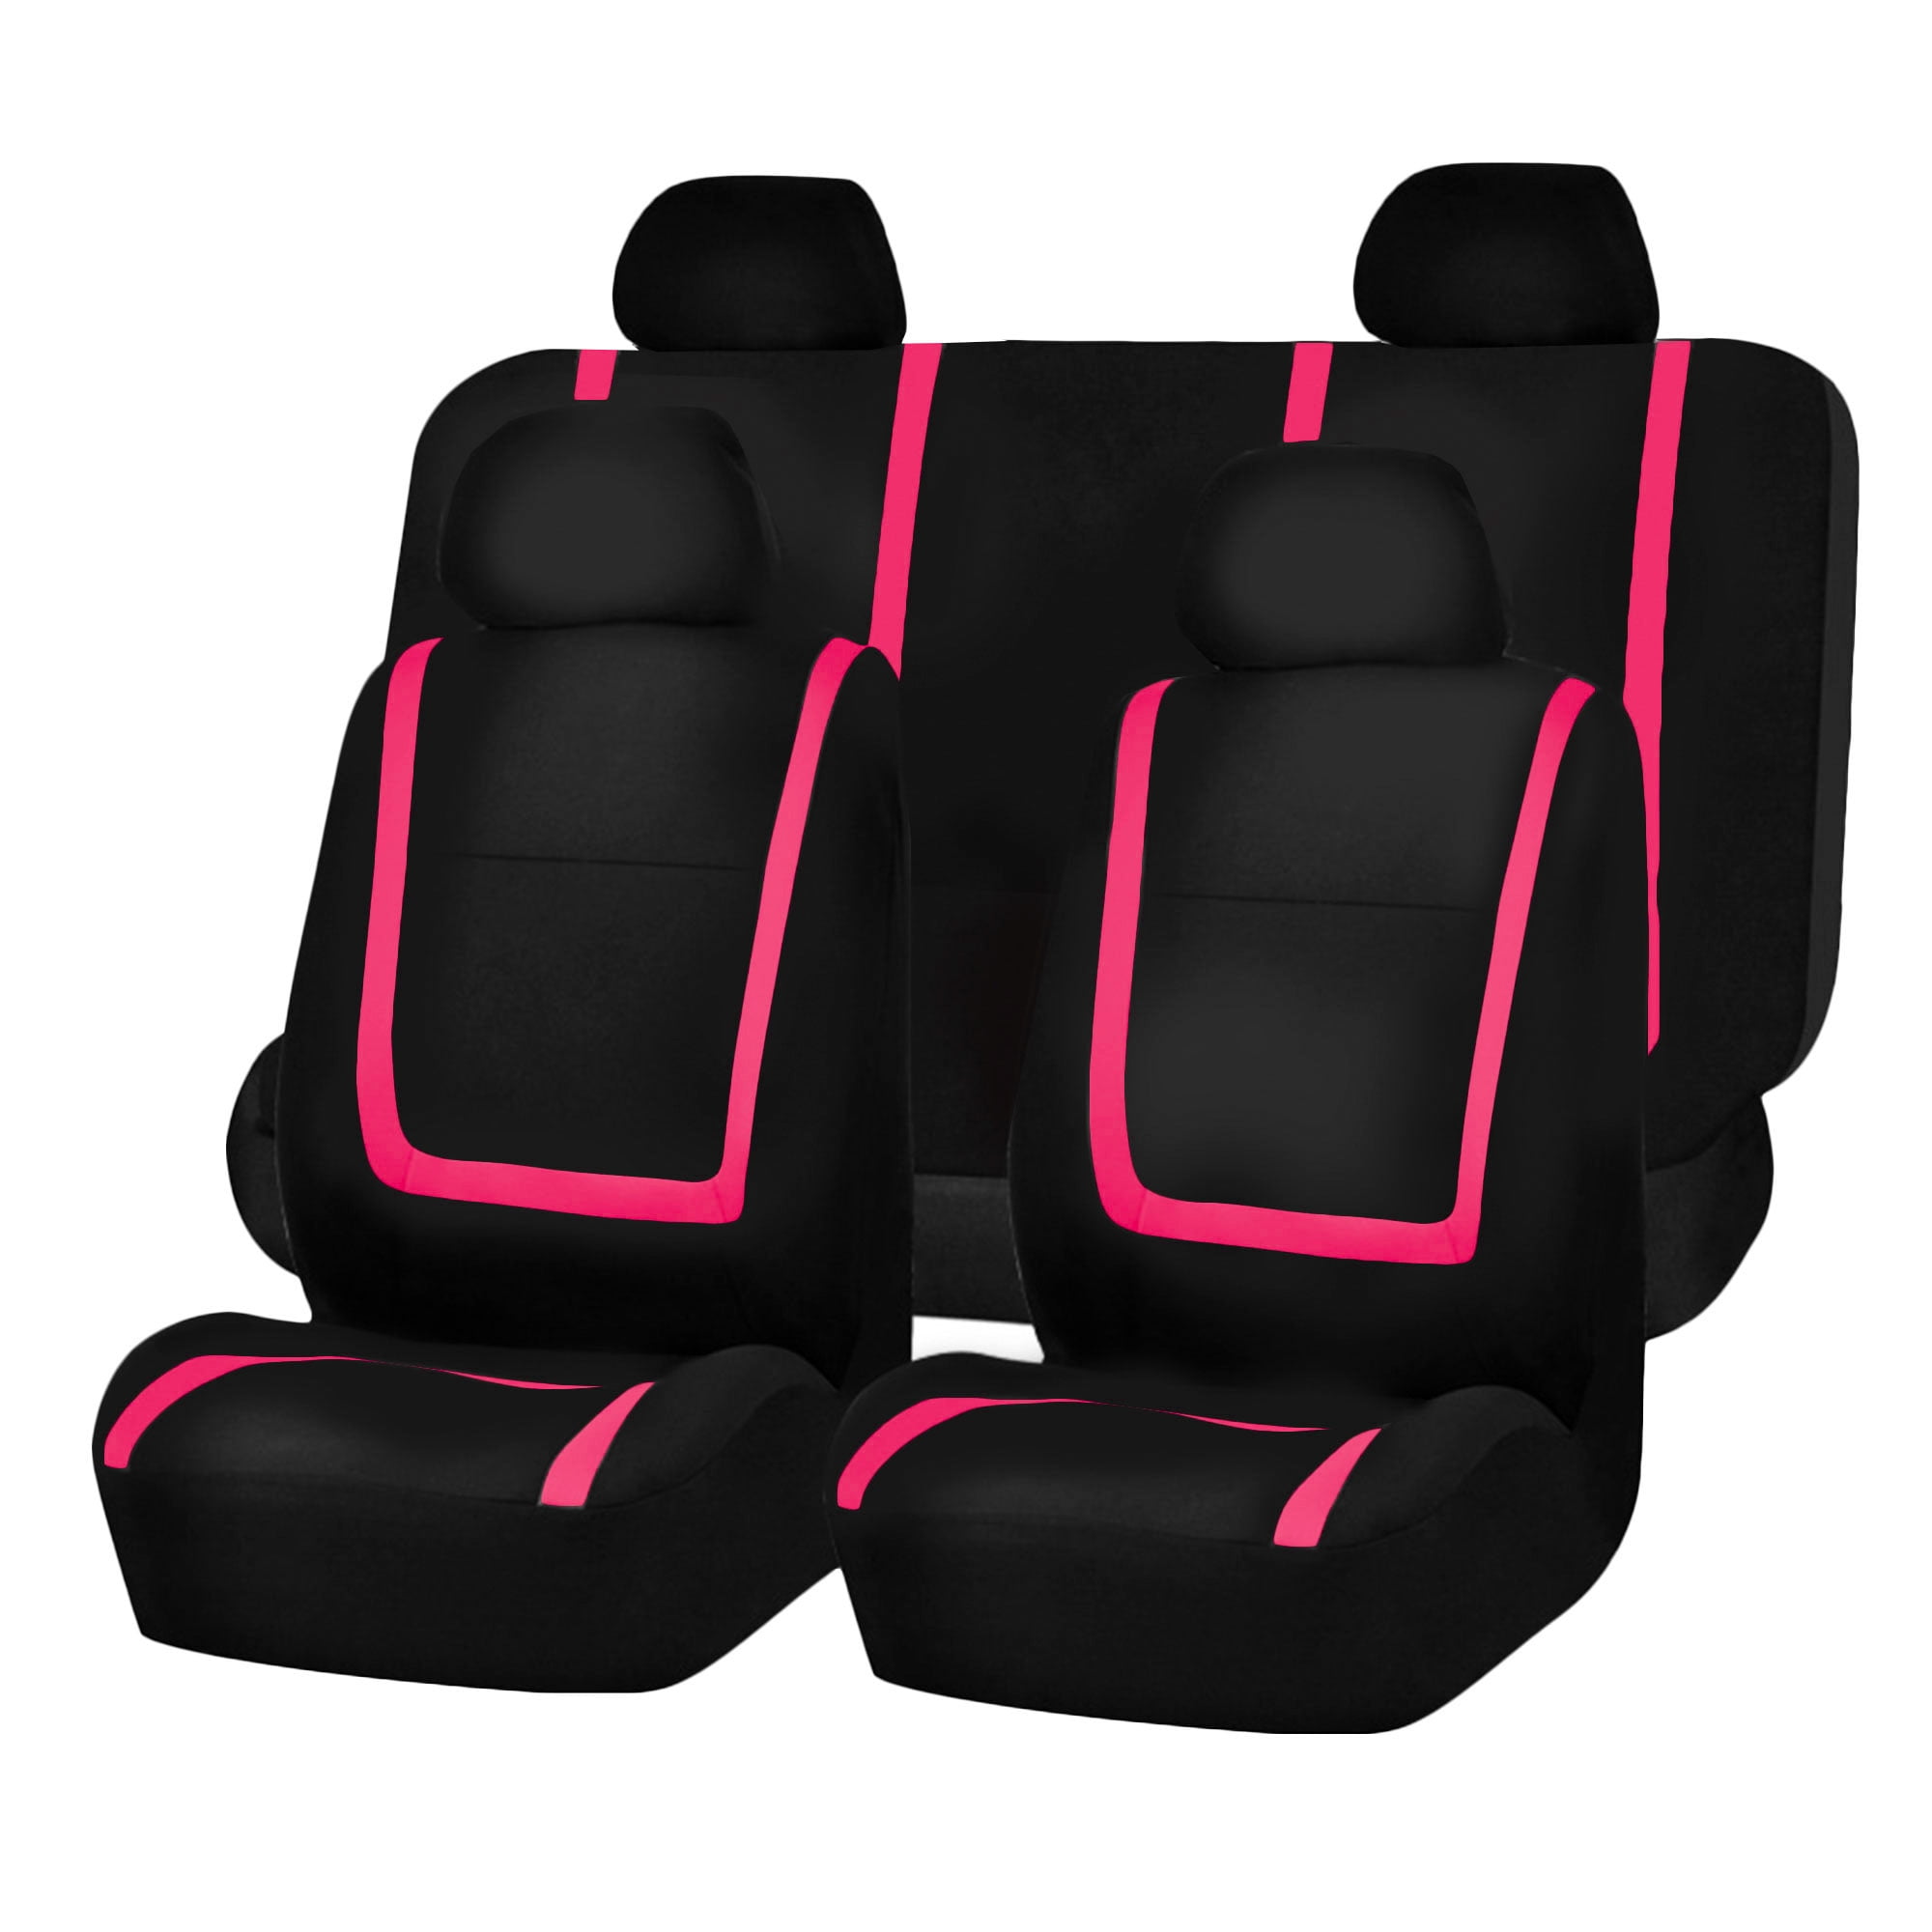 Full Set Burgundy FH GROUP Car Seat Covers 